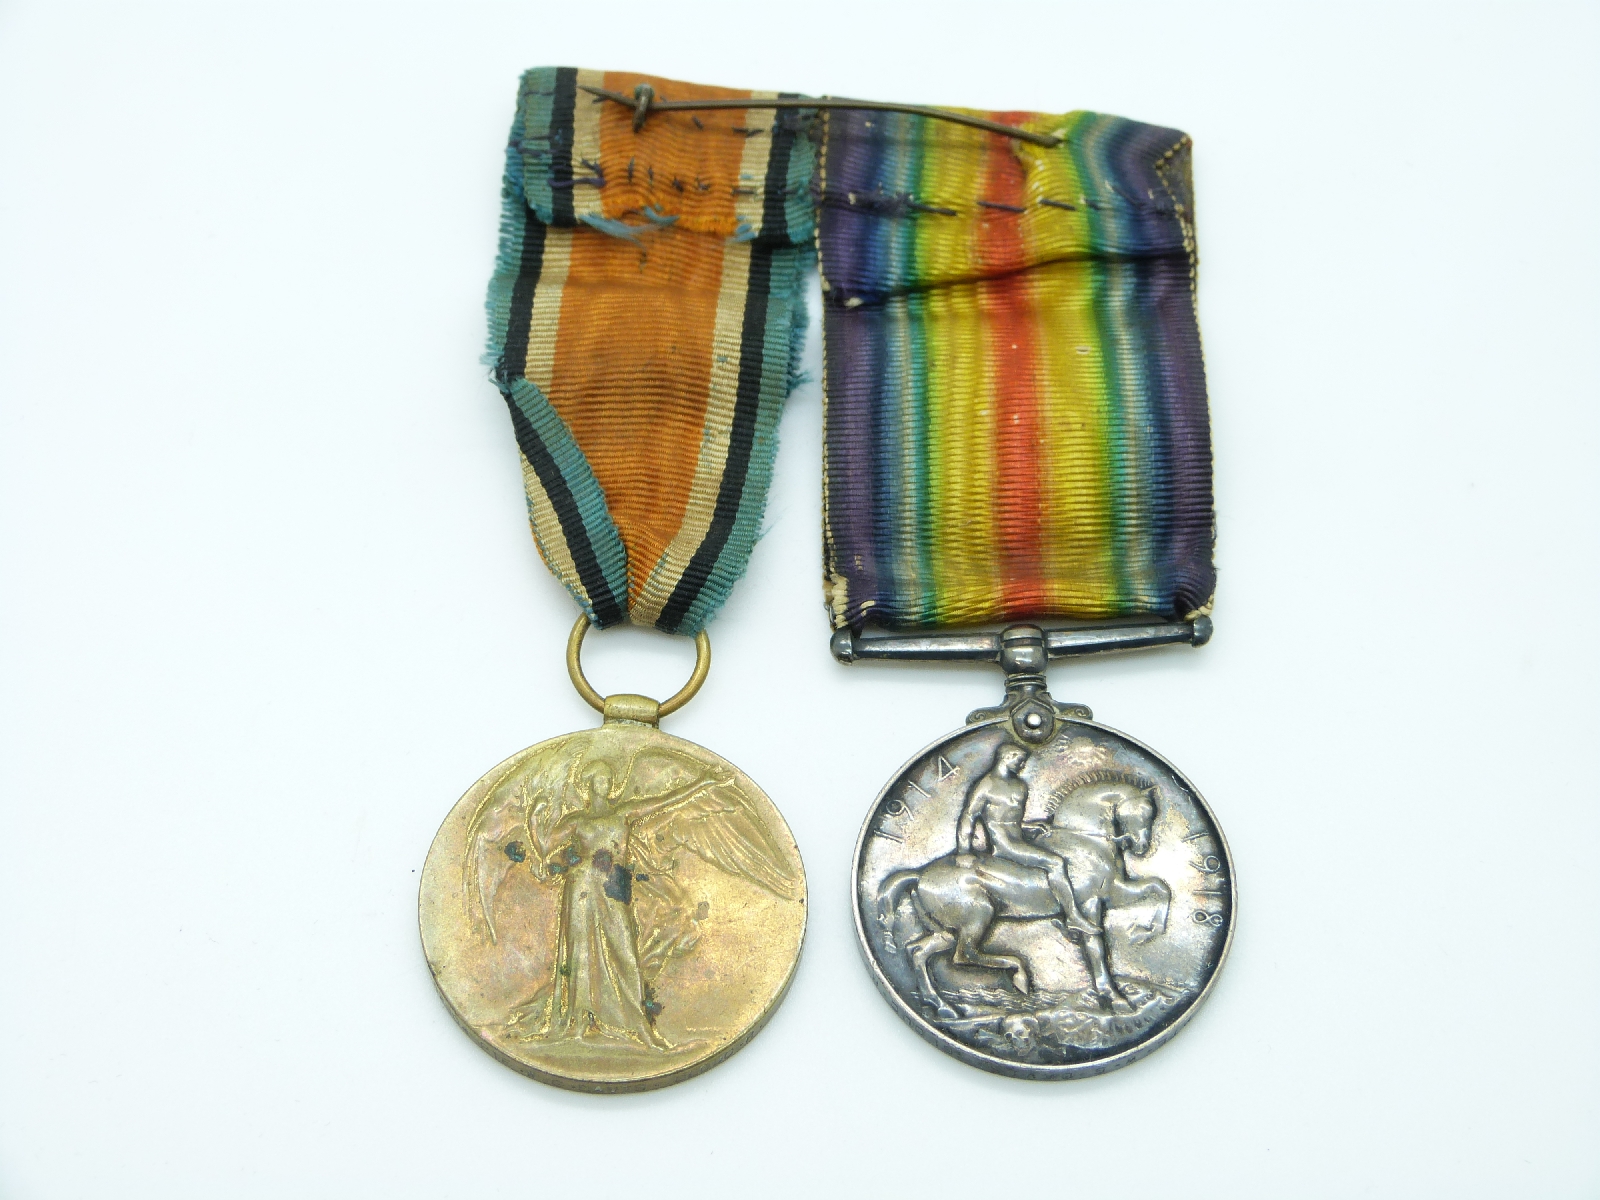 British Army WWI medal pair comprising War Medal and Victory Medal awarded to 52804 Pte. W.G. - Image 2 of 2